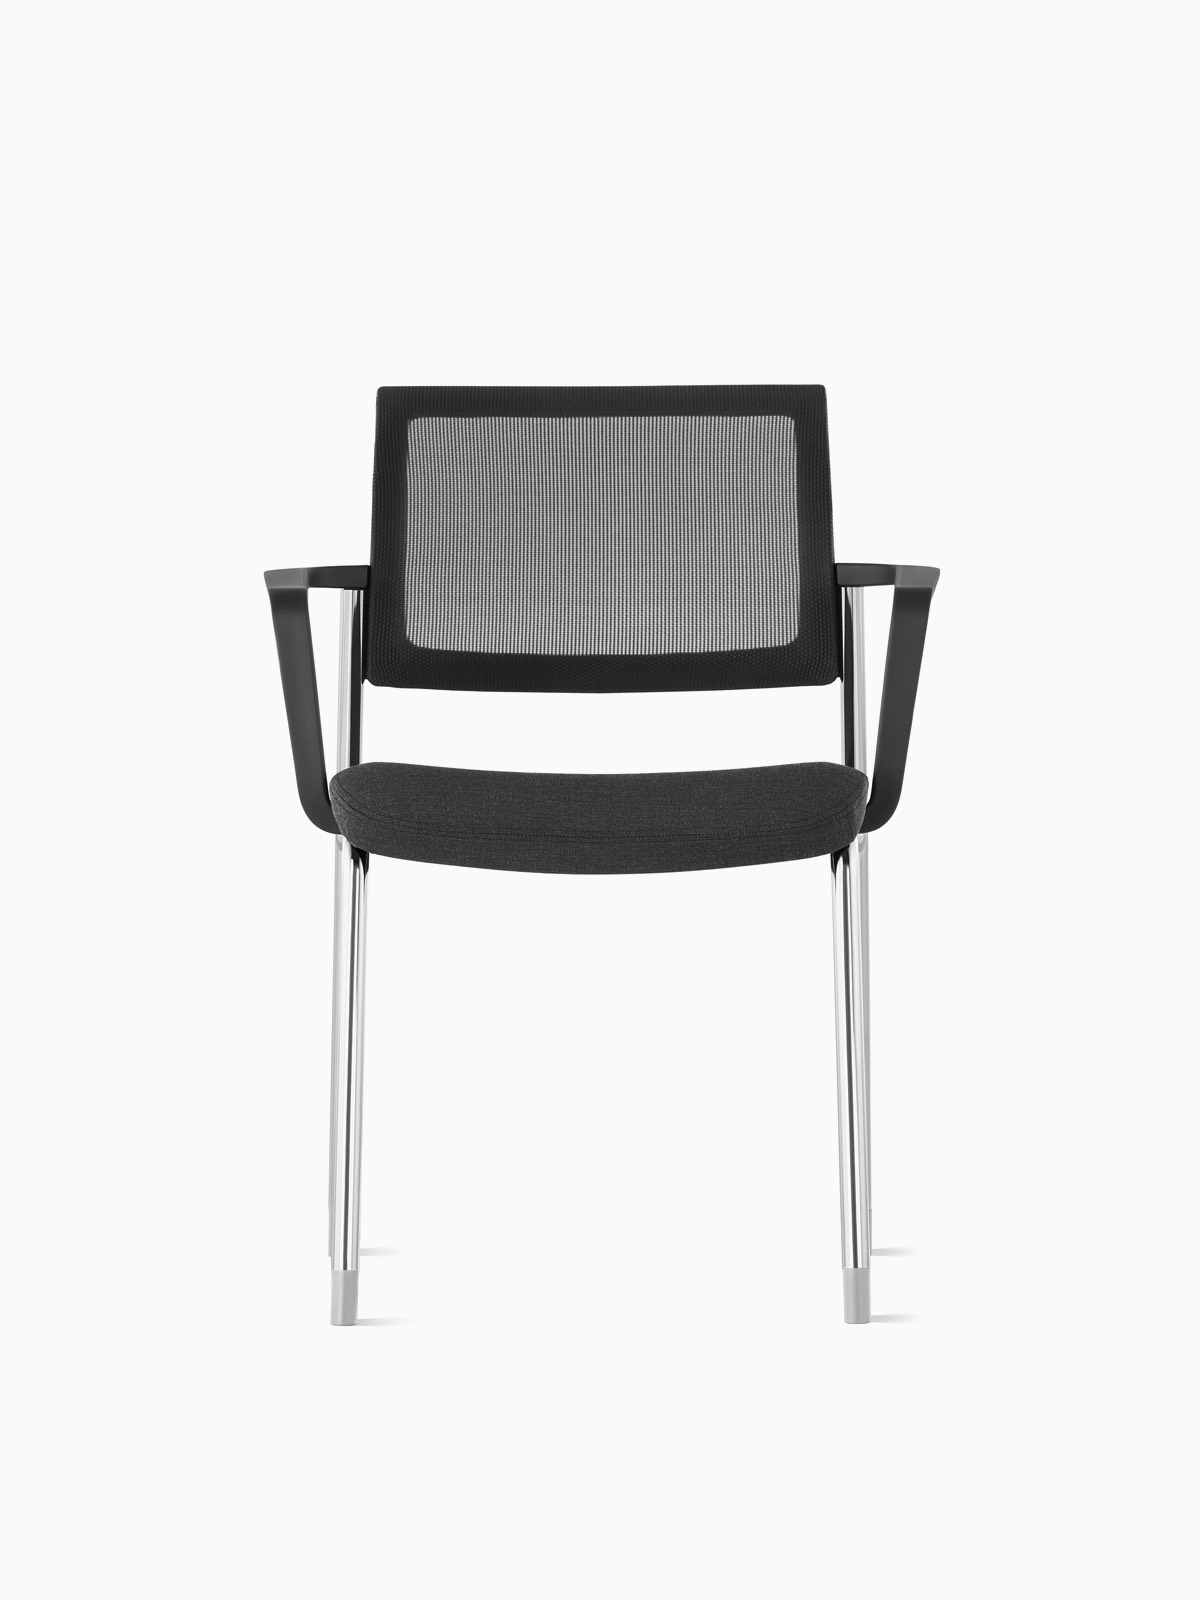 A black Verus Side Chair with silver legs.